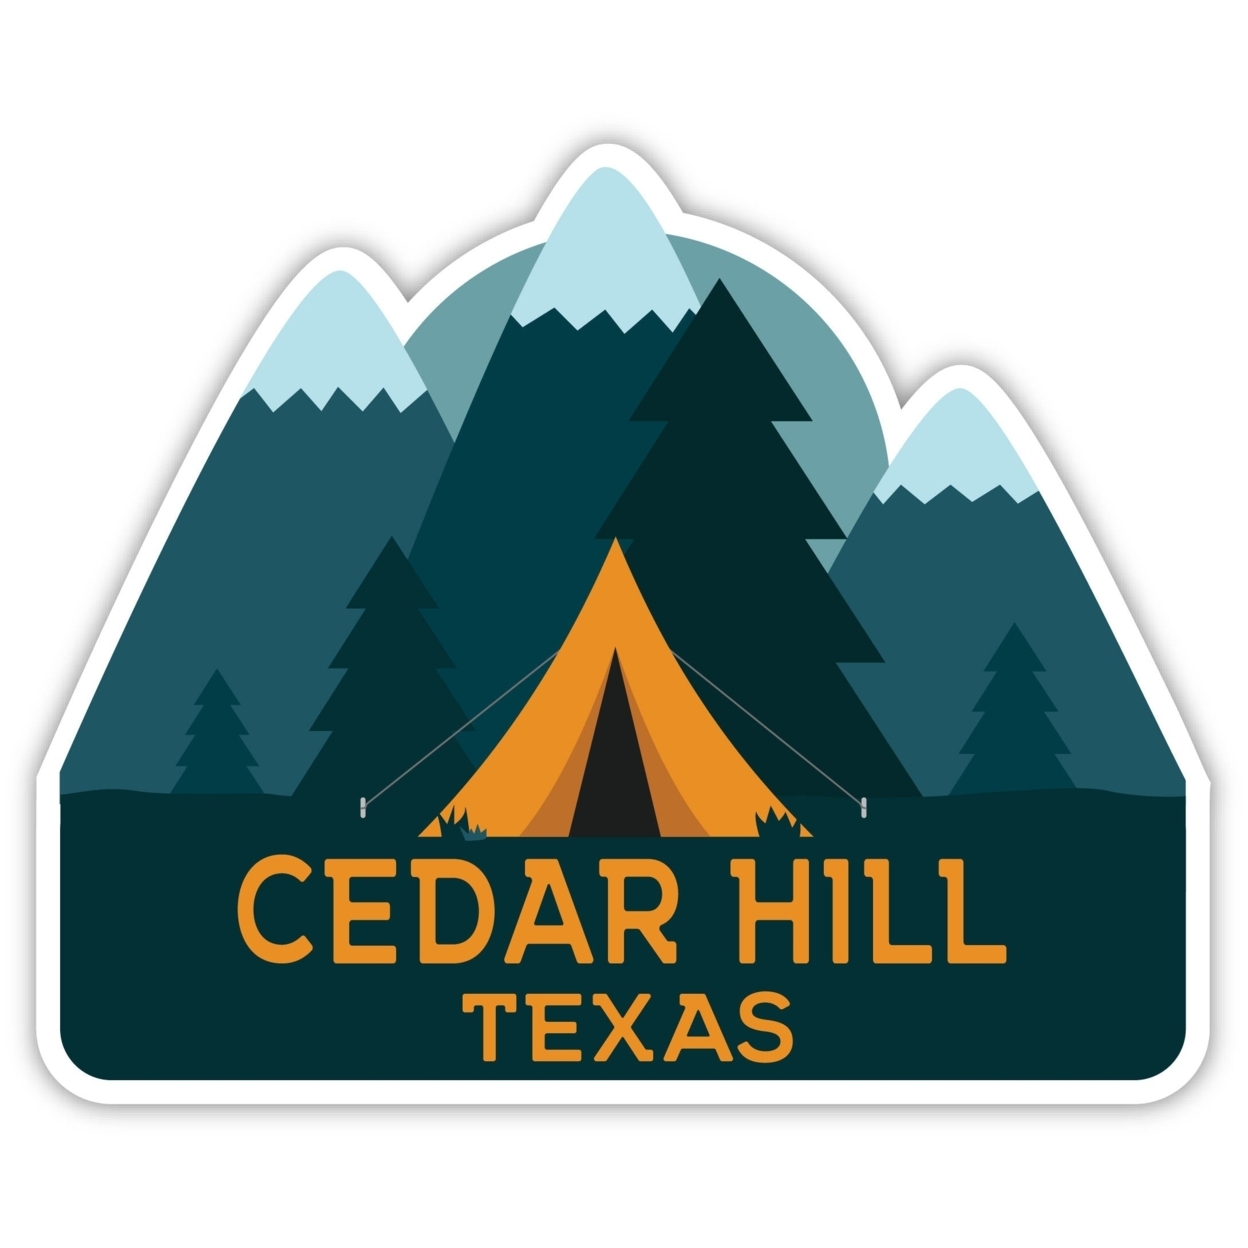 Cedar Hill Texas Souvenir Decorative Stickers (Choose Theme And Size) - 4-Pack, 2-Inch, Tent